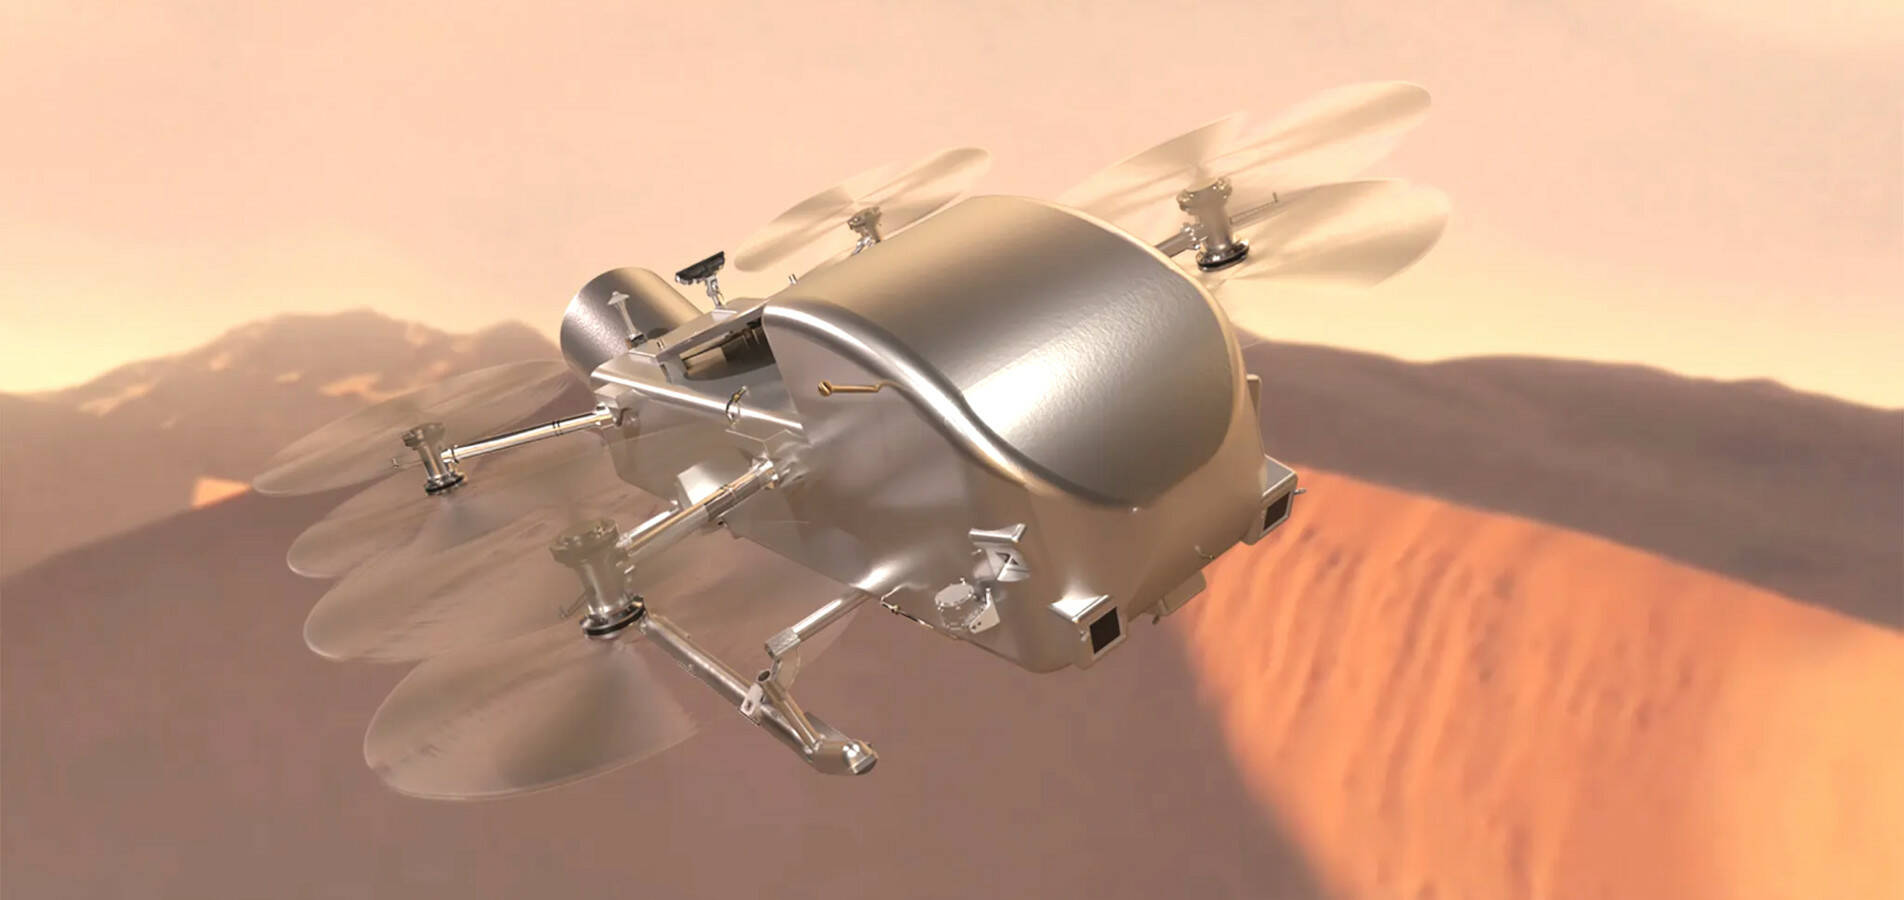 NASA confirms nuclear-powered Dragonfly drone is going to Titan (3 minute read)